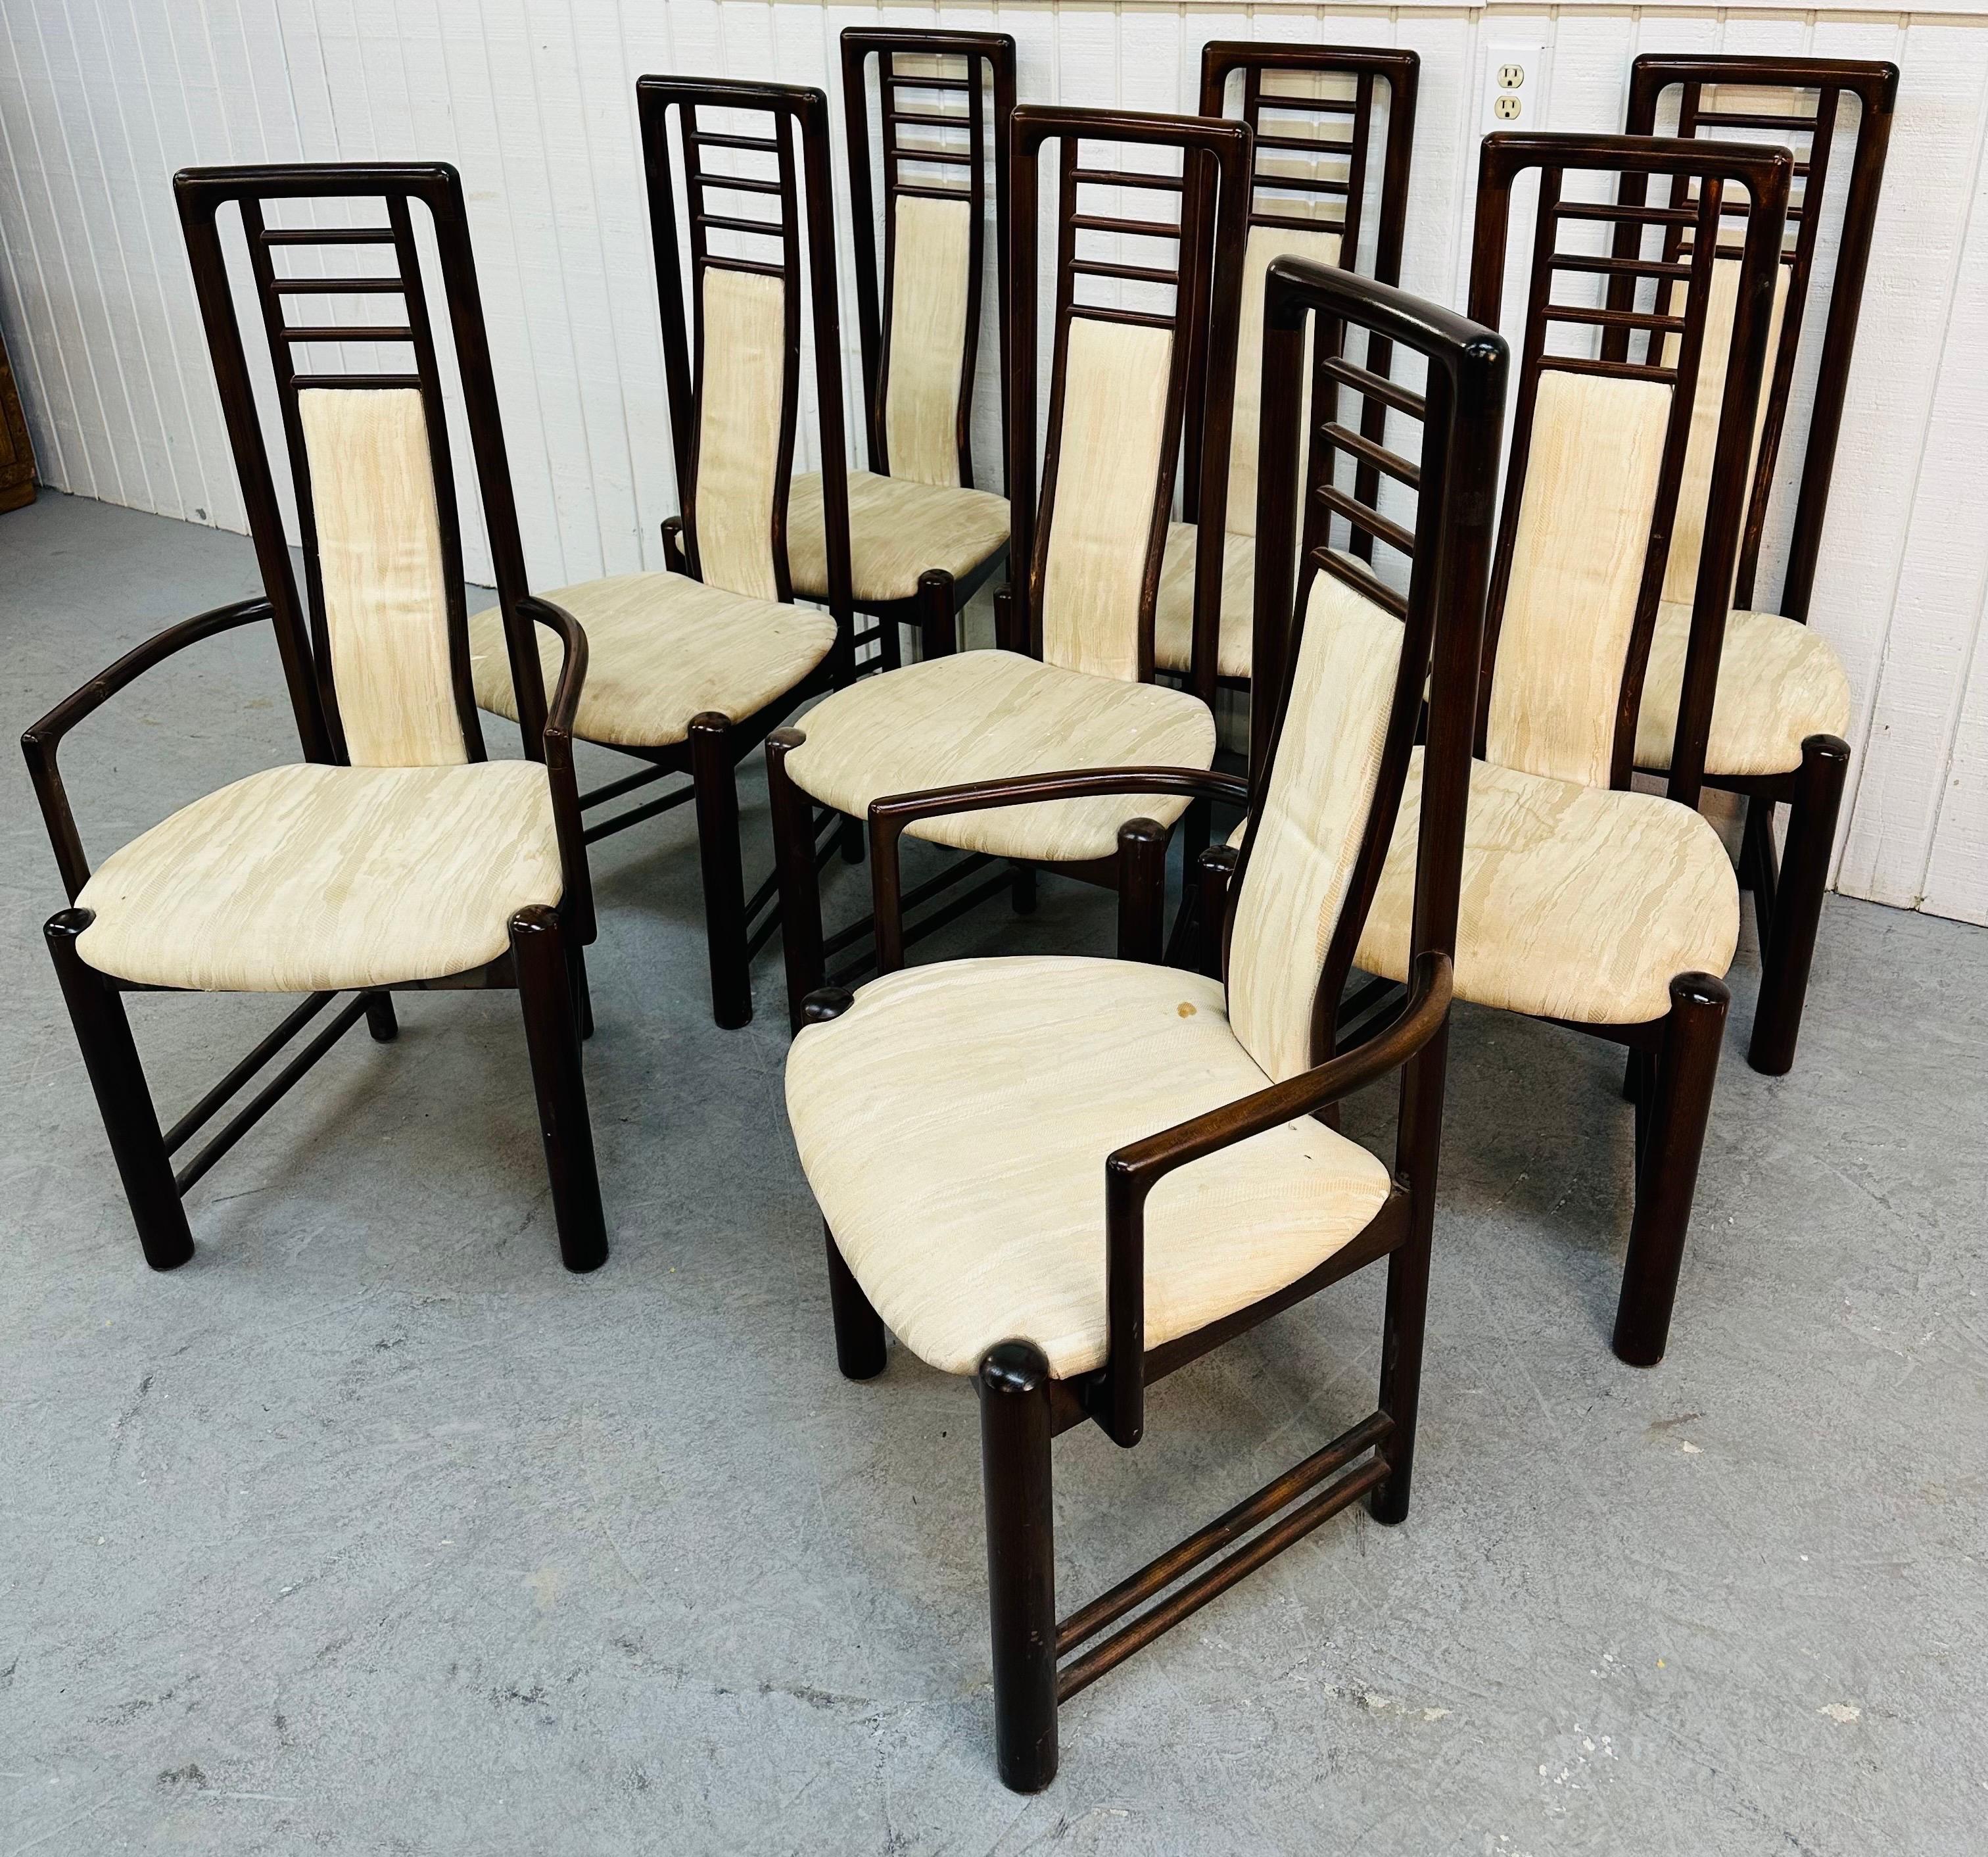 This listing is for a set of eight vintage Danish Modern Rosewood Dining Chairs. Featuring two arm chairs, six straight chairs, high back design, upholstered seats and back rests. This is an exceptional combination of quality and design!